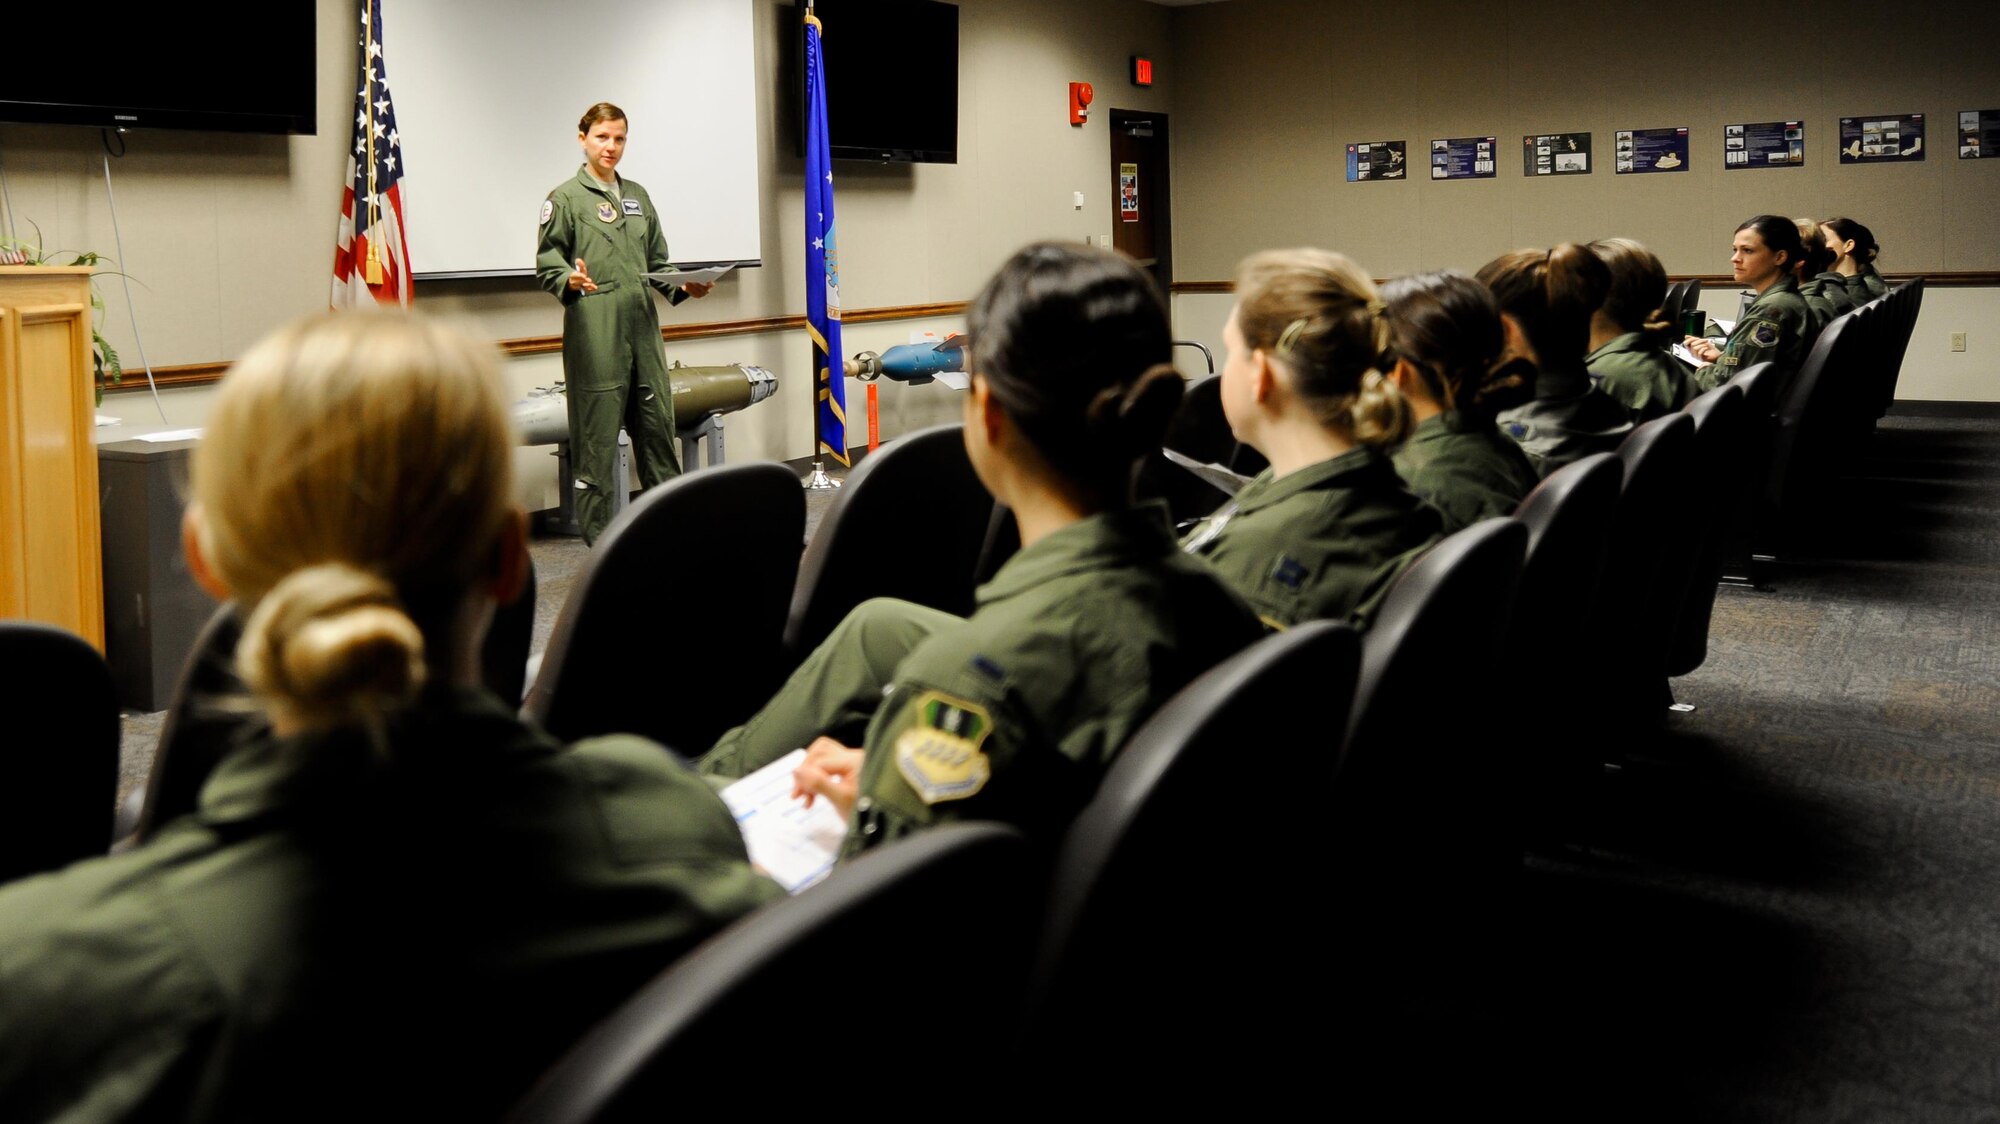 Maj. Sarah Fortin, 20th Bomb Squadron assistant director of operations, briefs aircrew prior to their takeoff from Barksdale Air Force Base, La., March 22, 2016. For the first time in Air Force Global Strike Command and B-52 Stratofortress history, all-female aircrews were assembled to honor Women’s History Month. (U.S. Air Force photo/2nd Lt. Jessica Adams)